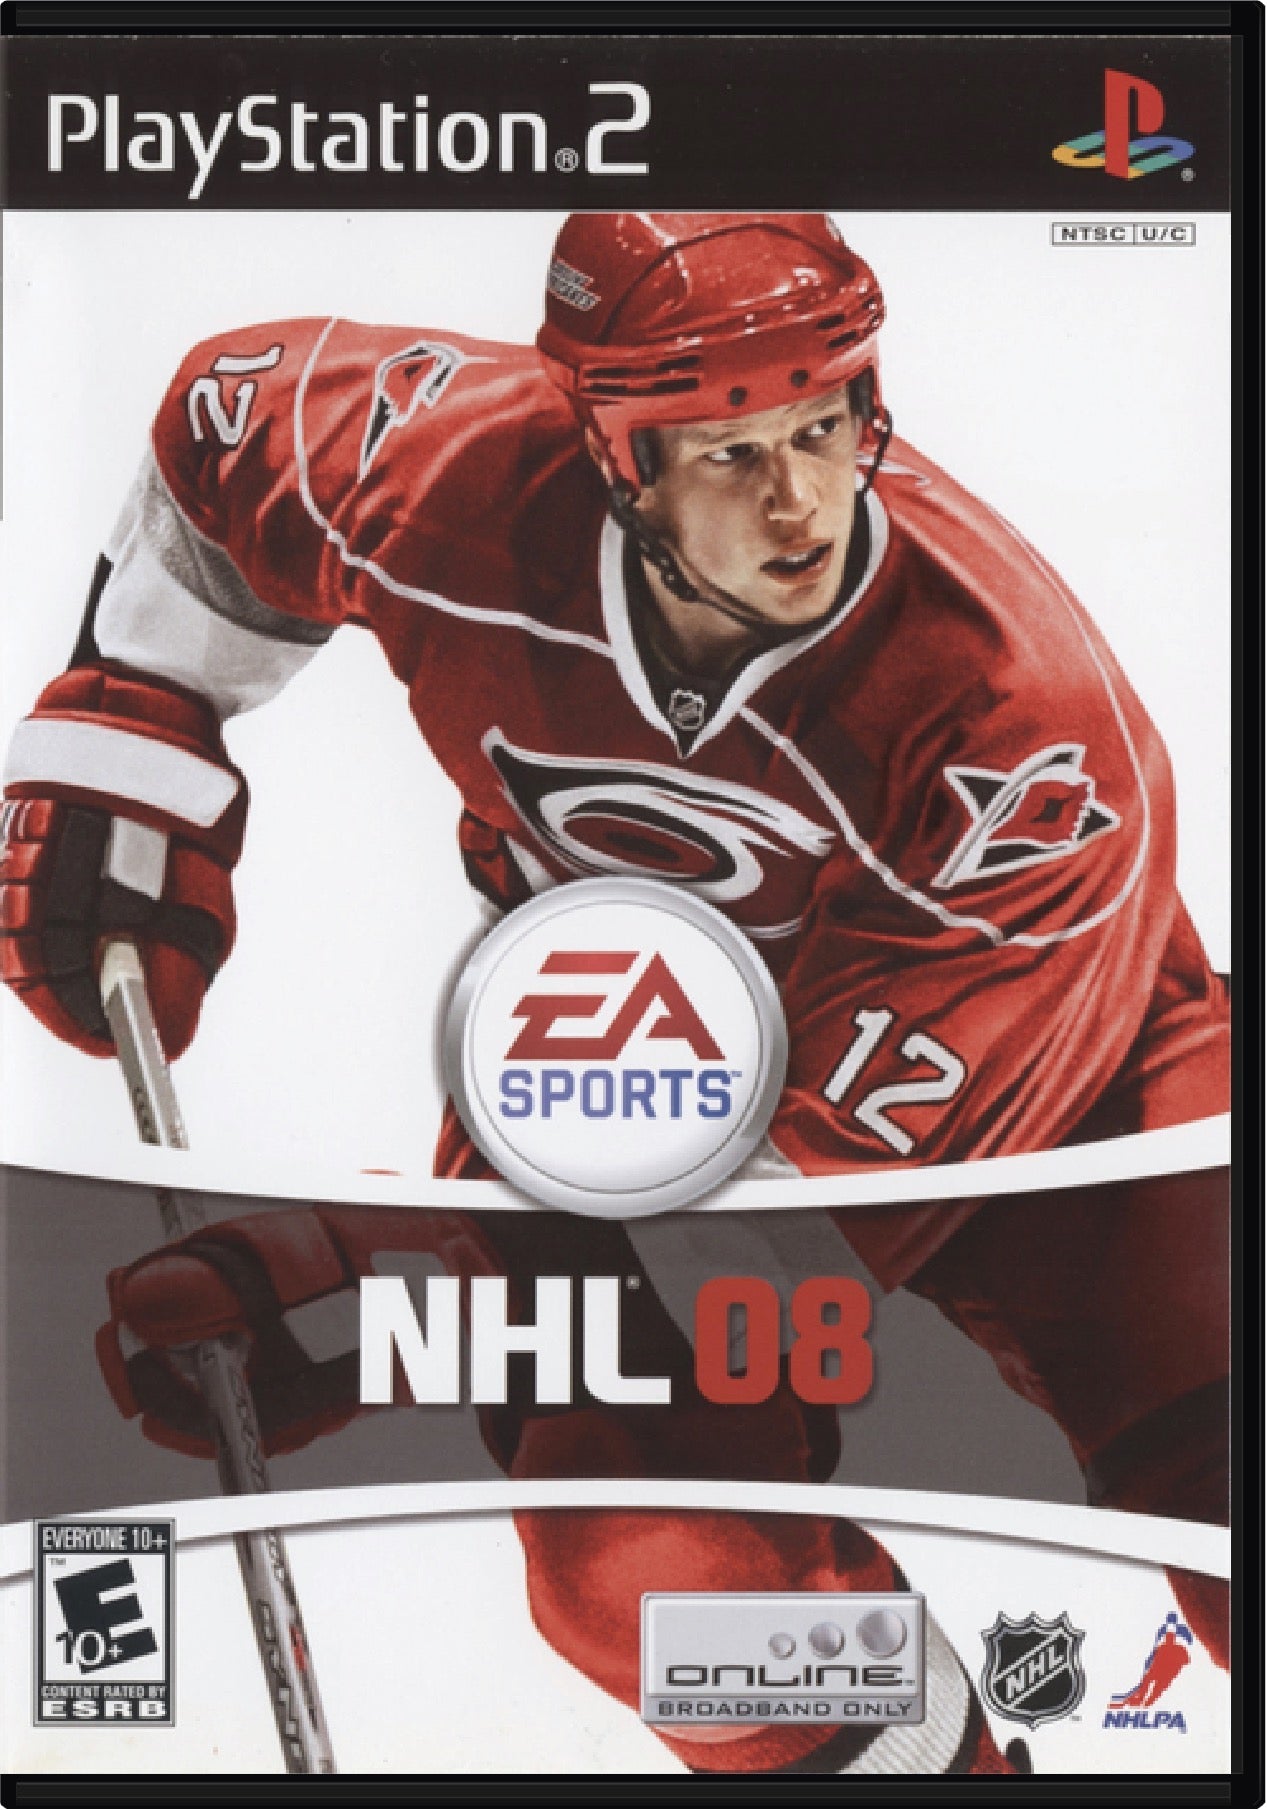 NHL 08 Cover Art and Product Photo